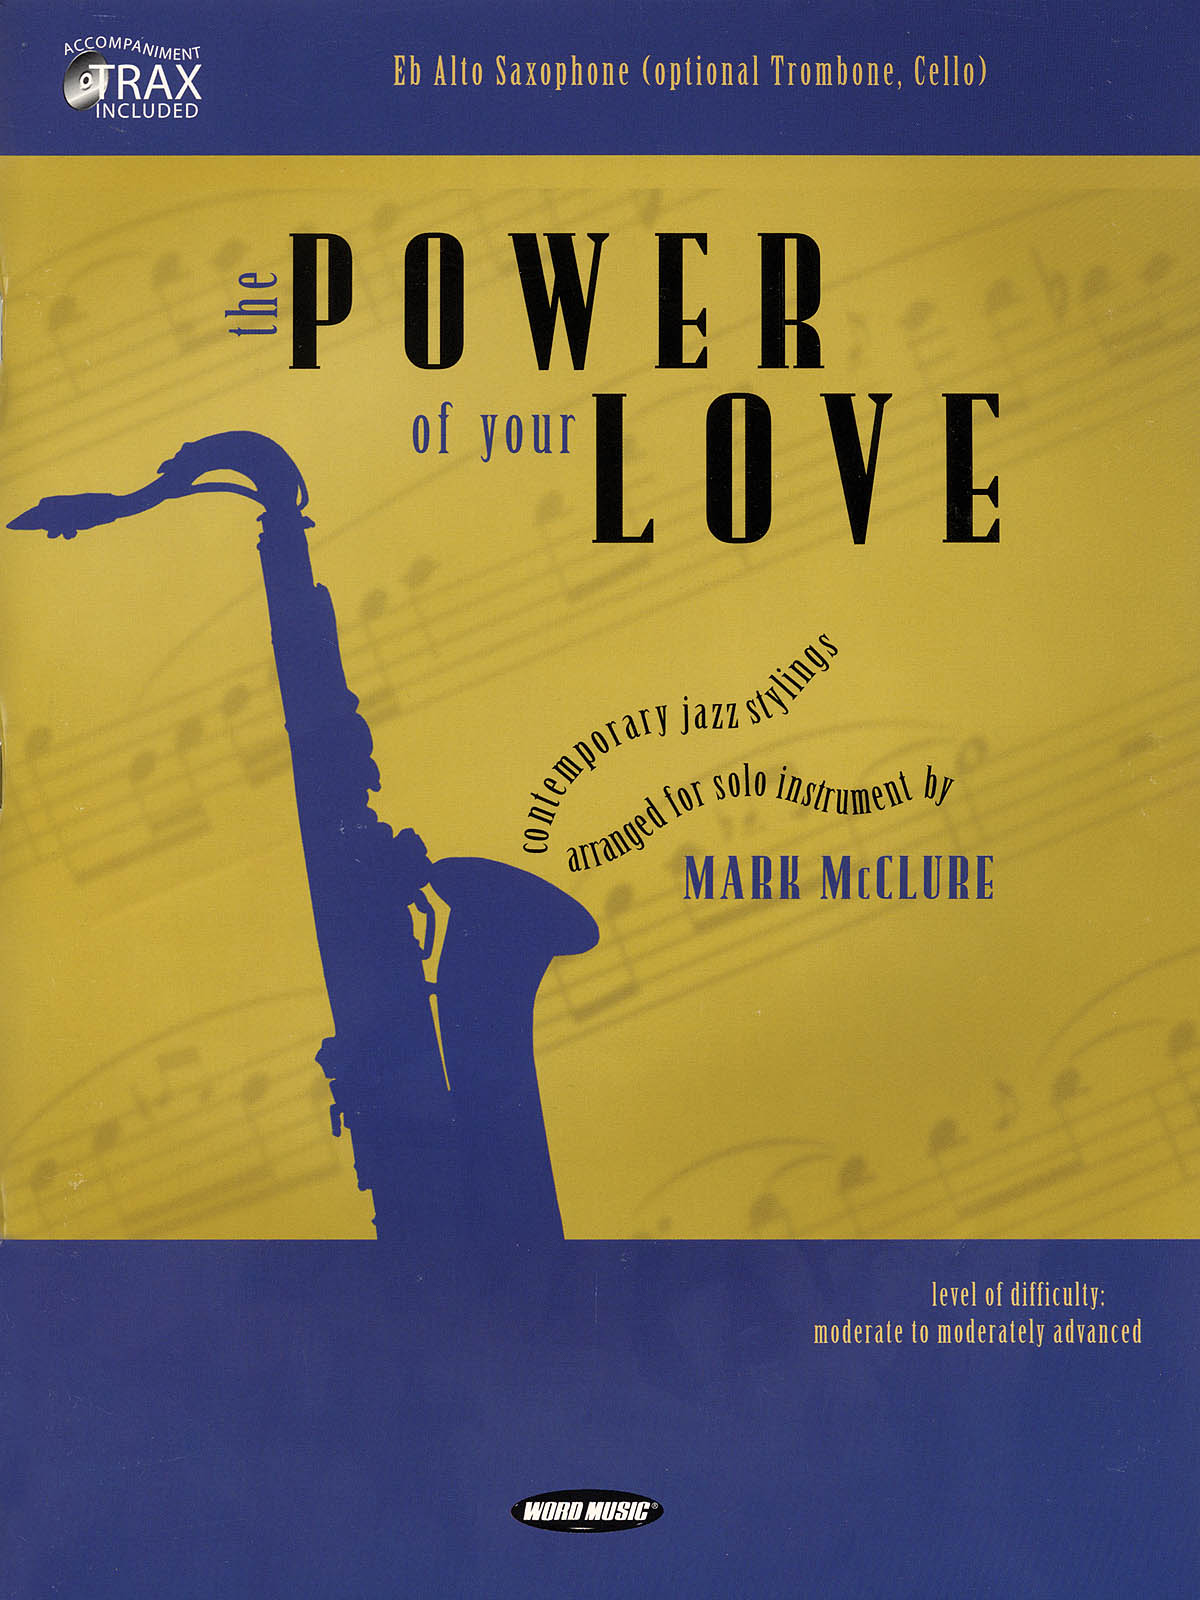 The Power of Your Love